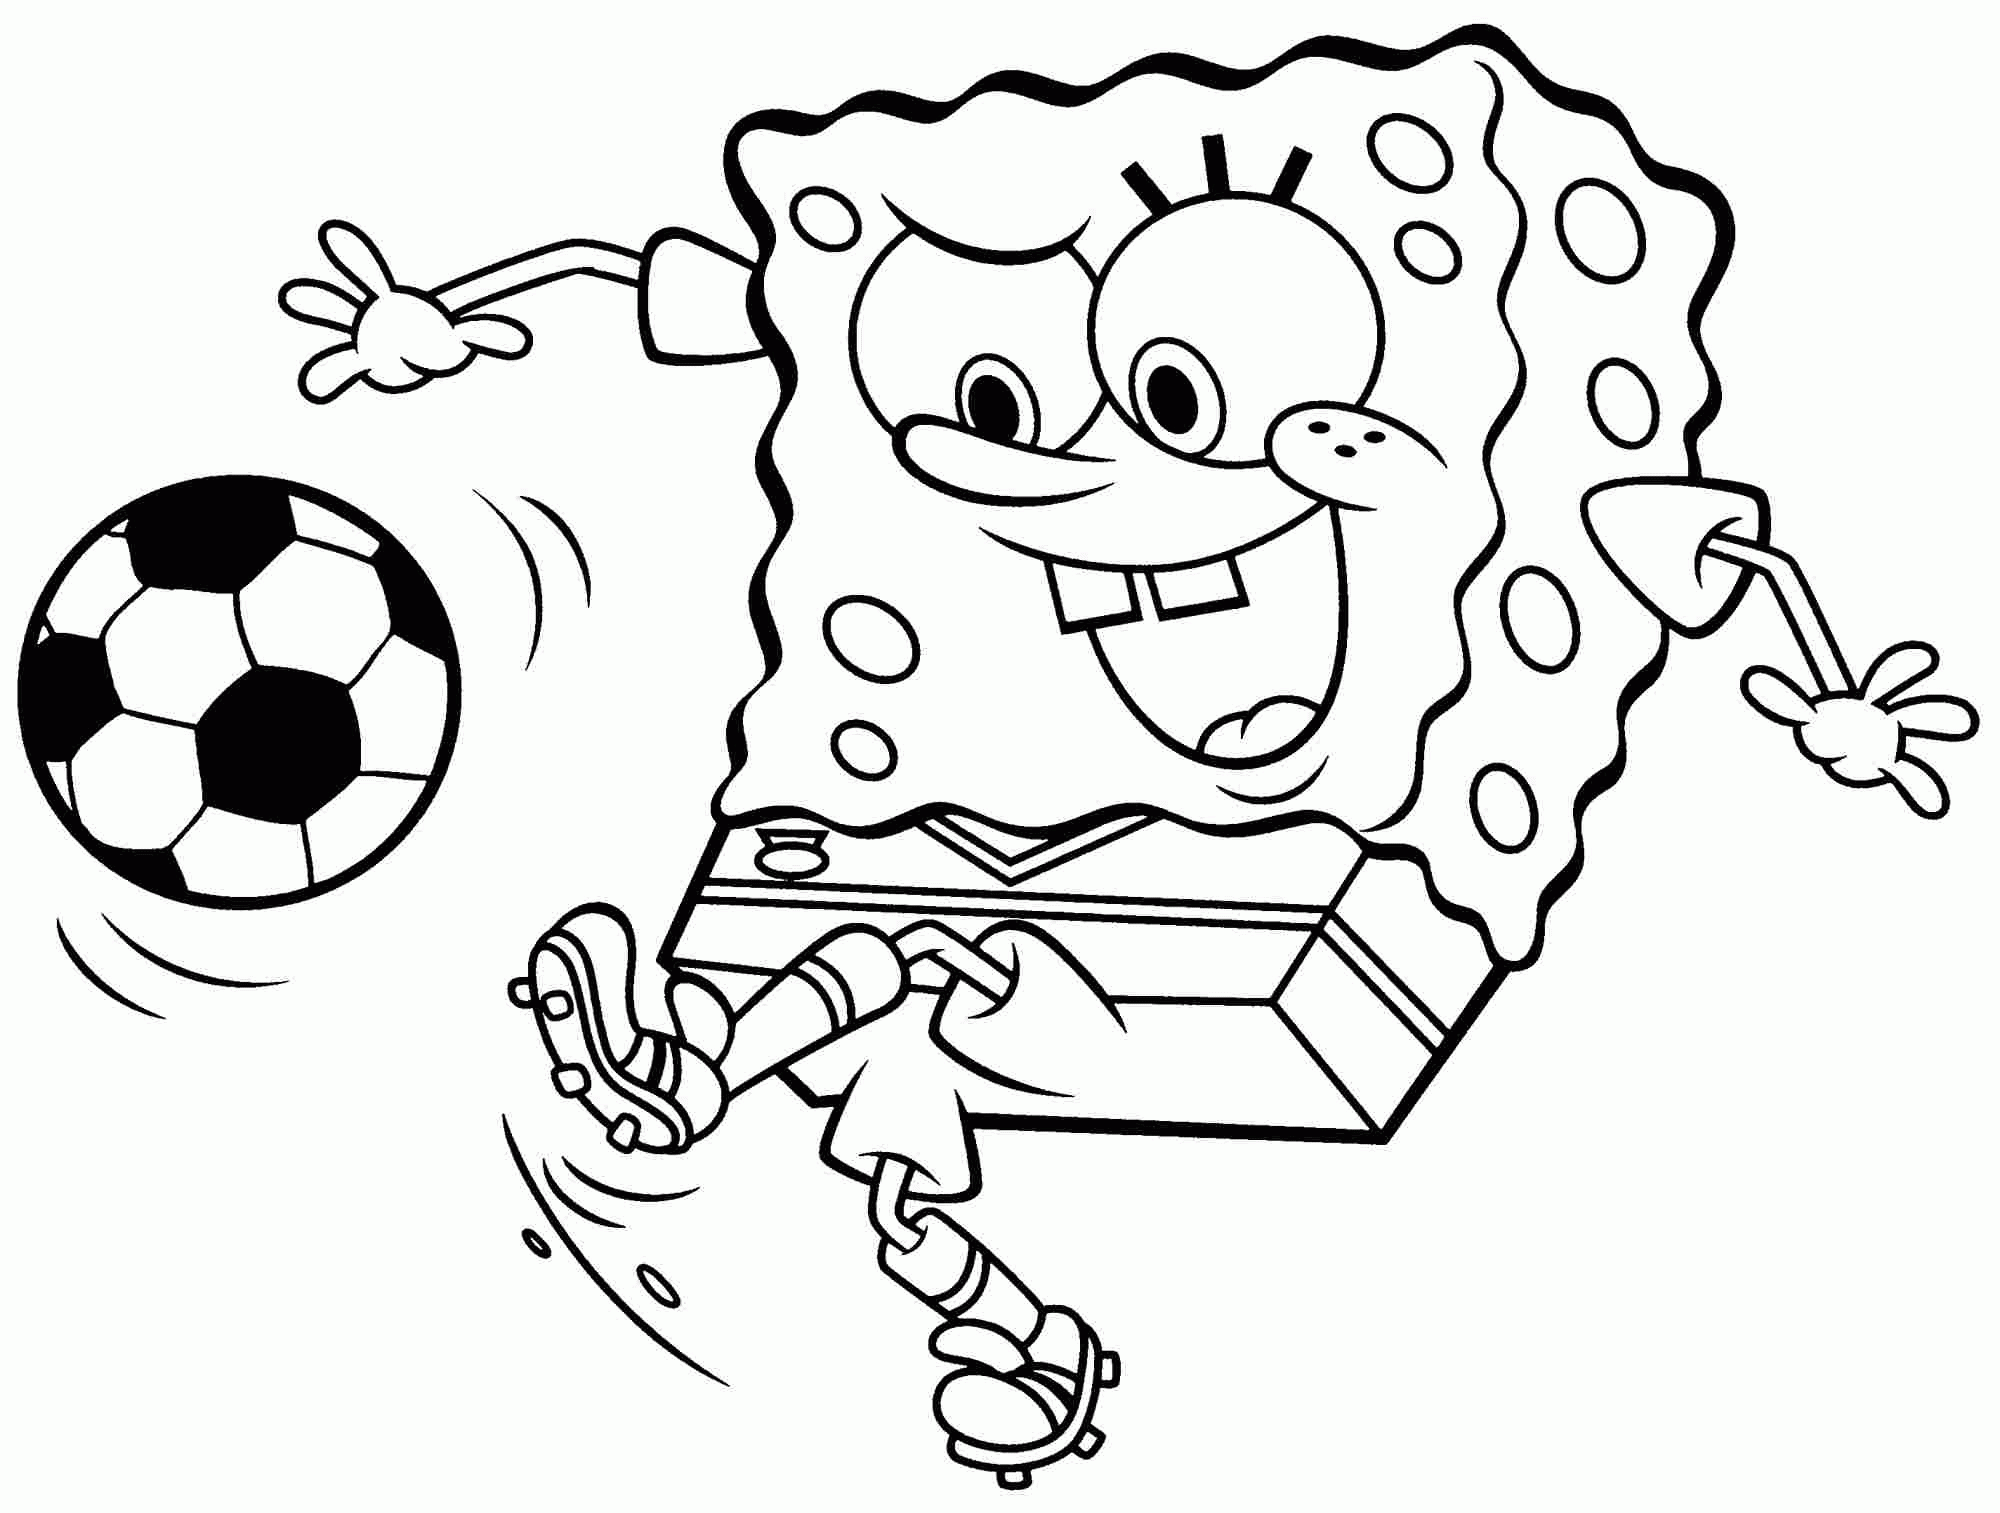 Spongebob Characters 66 For Kids Coloring Page